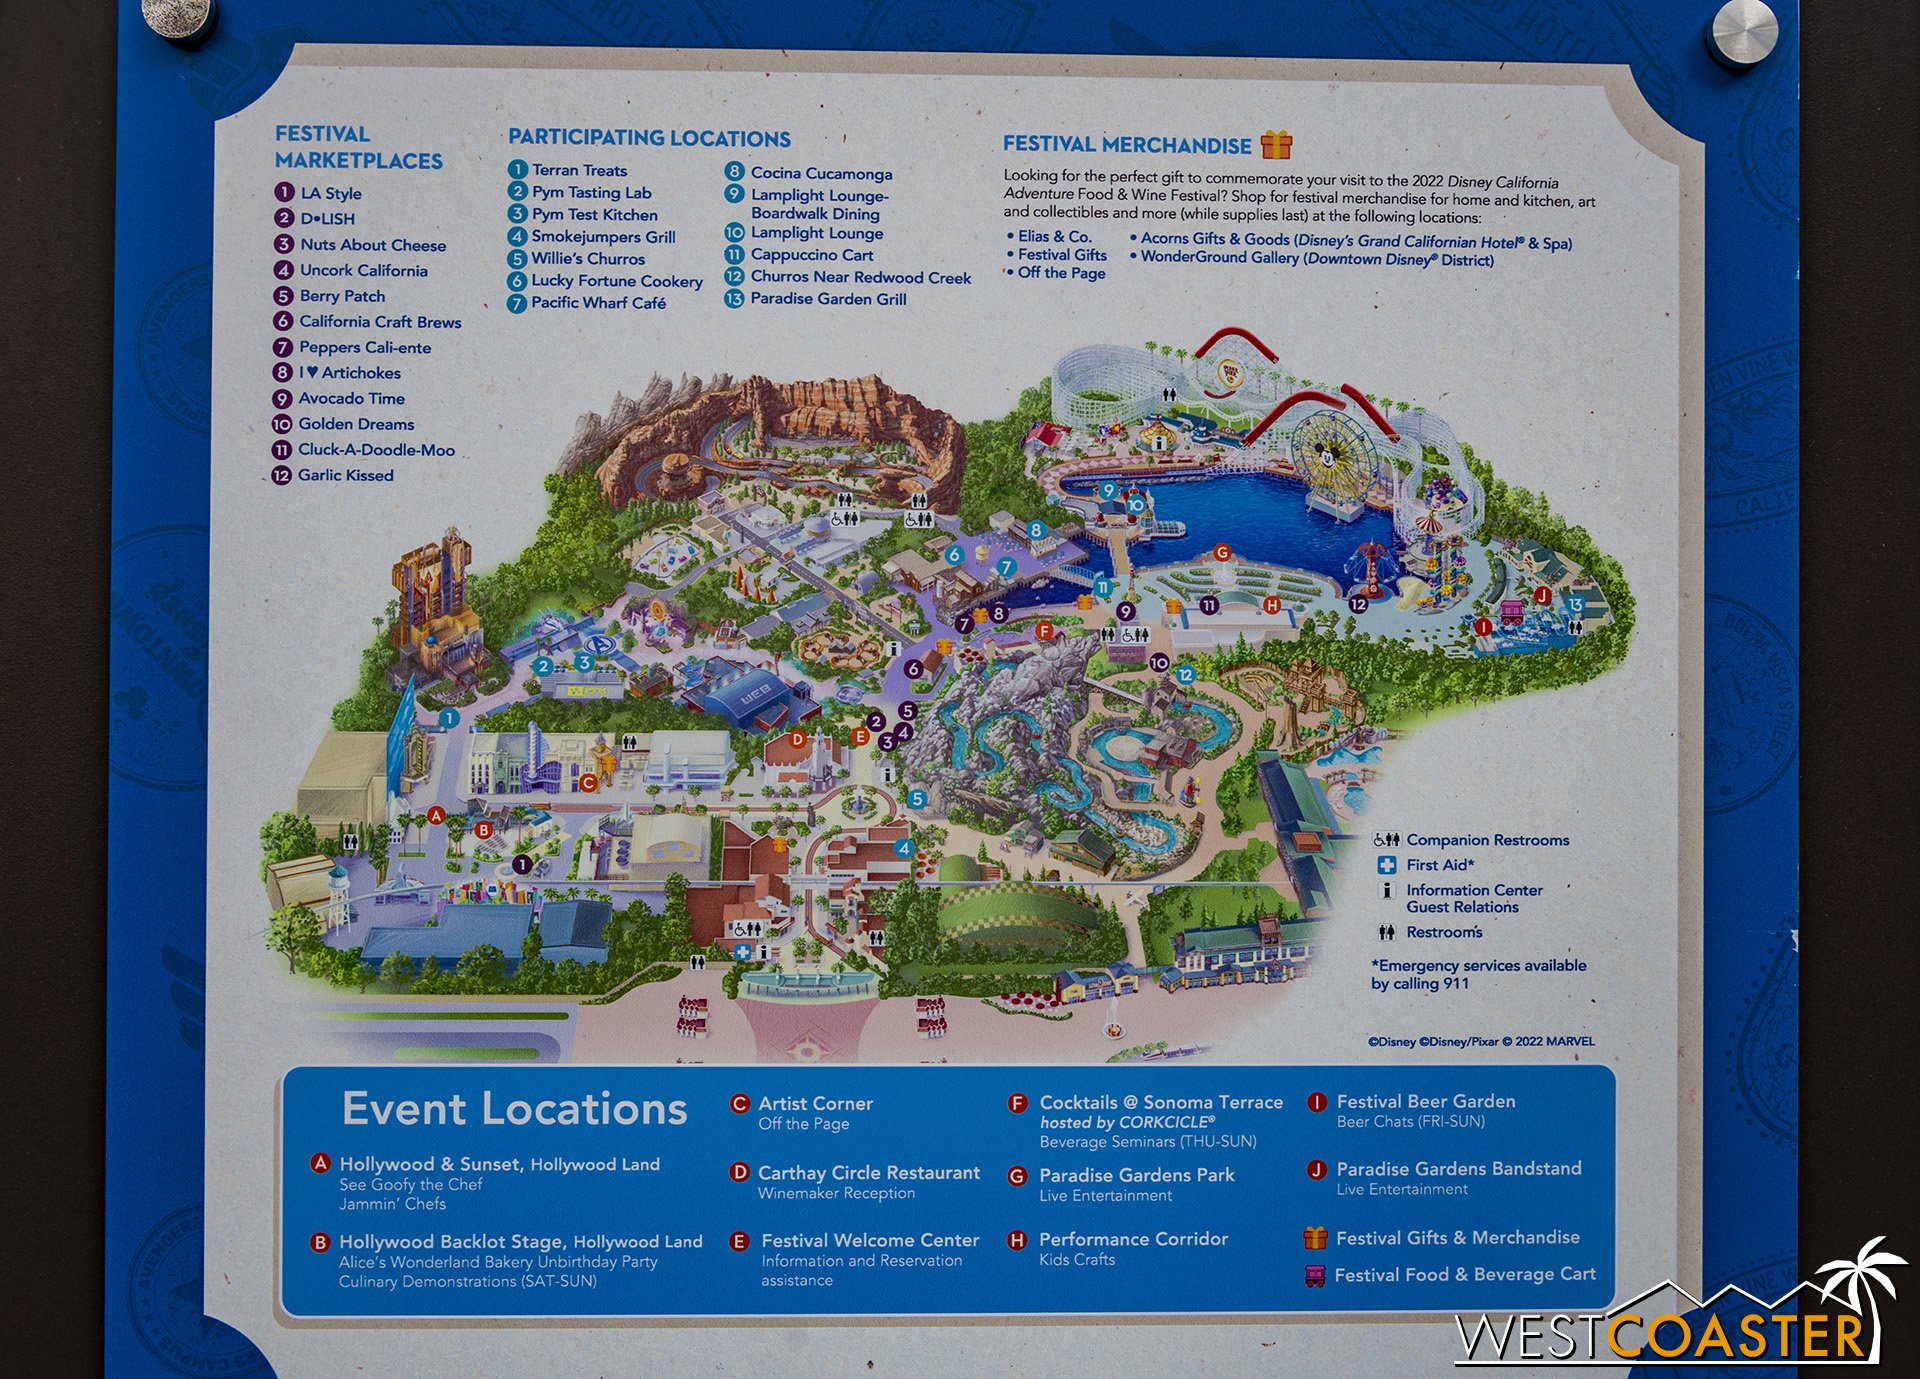  Here’s a map that shows locations of event activities, to get a lay of the land. 